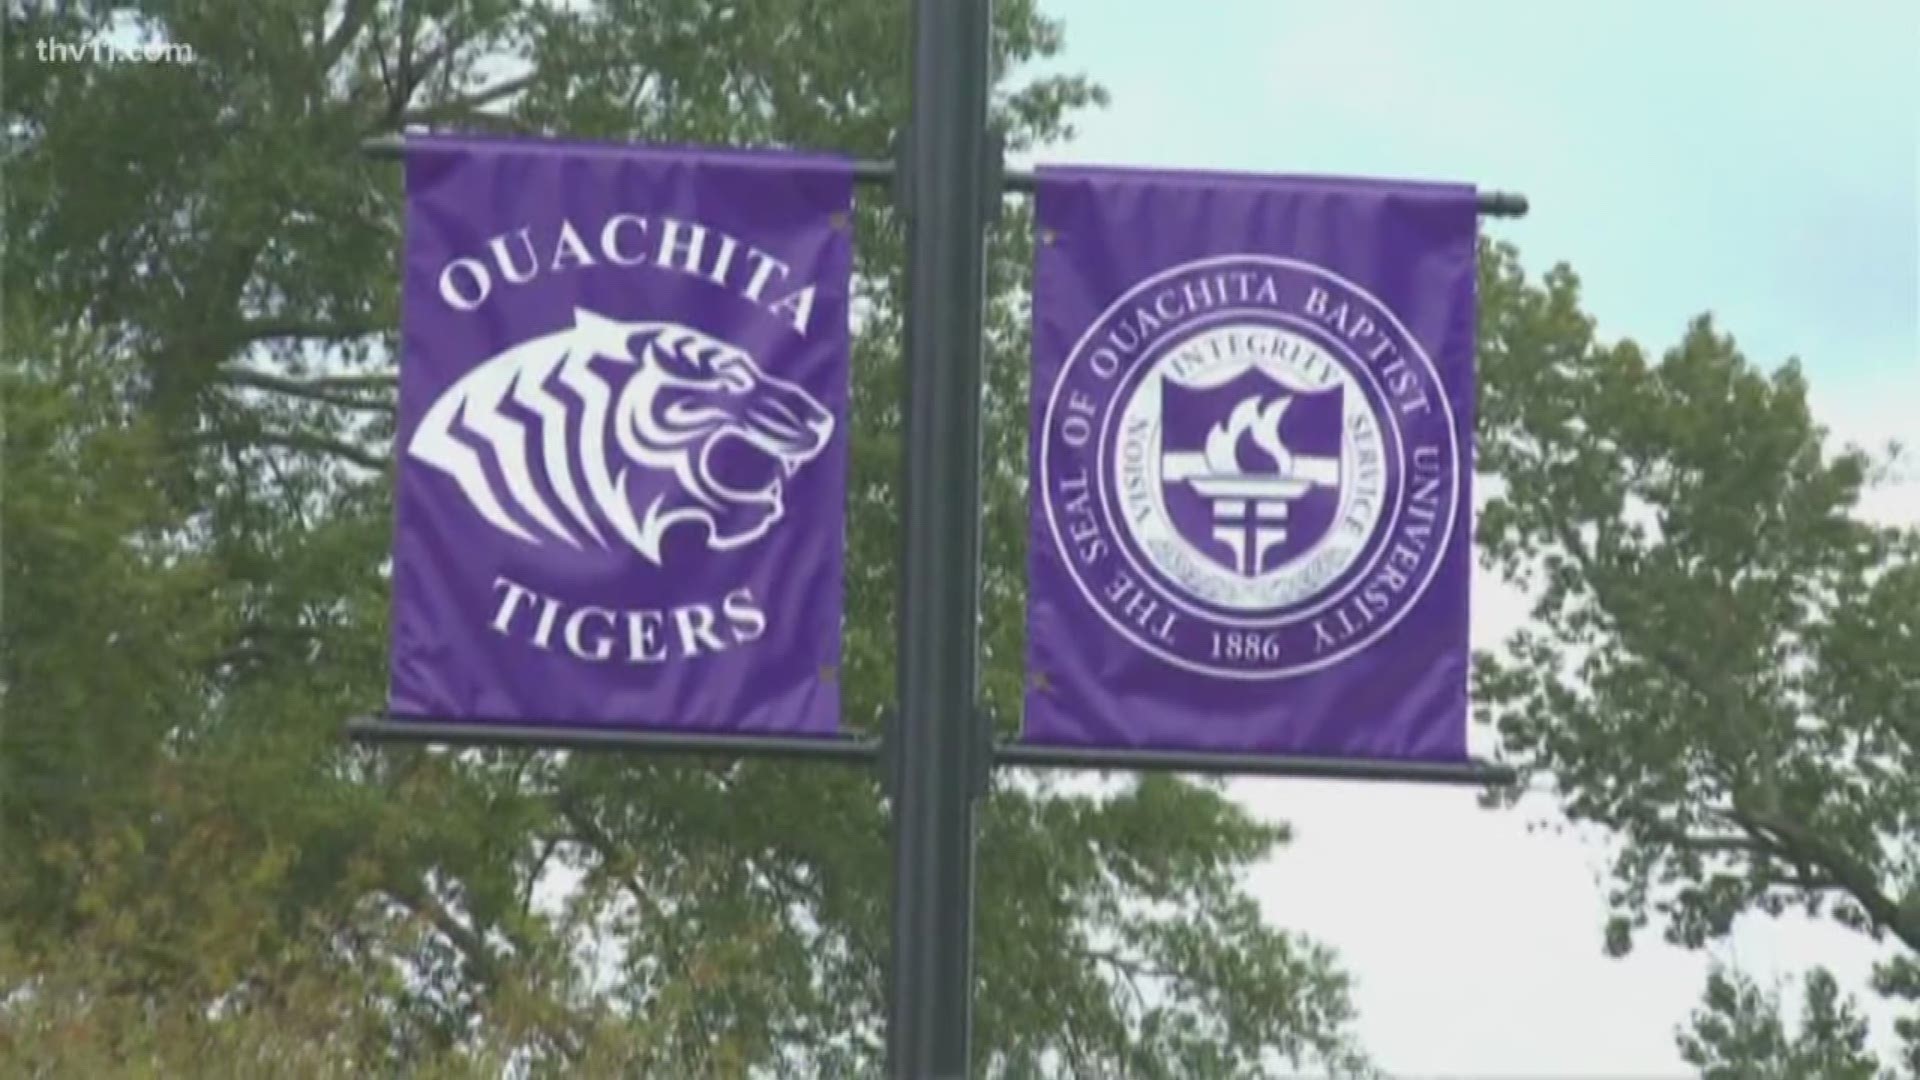 For the second straight year, an anonymous person has given Ouachita Baptist University an unsolicited $1 million donation.